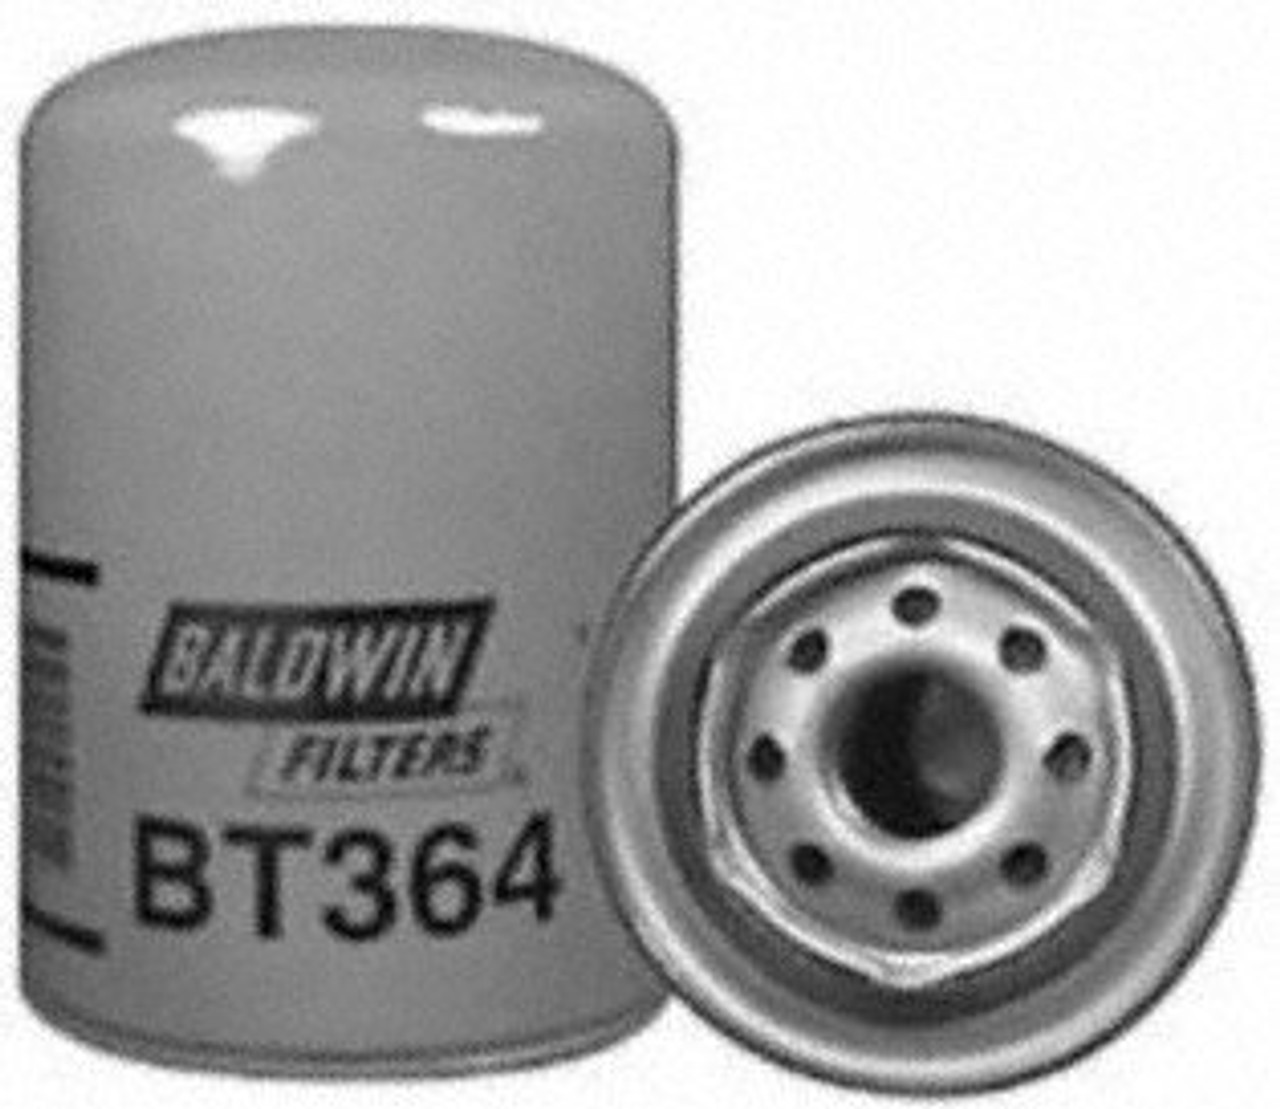 Baldwin BT364 Lube or Hyd Spin-on